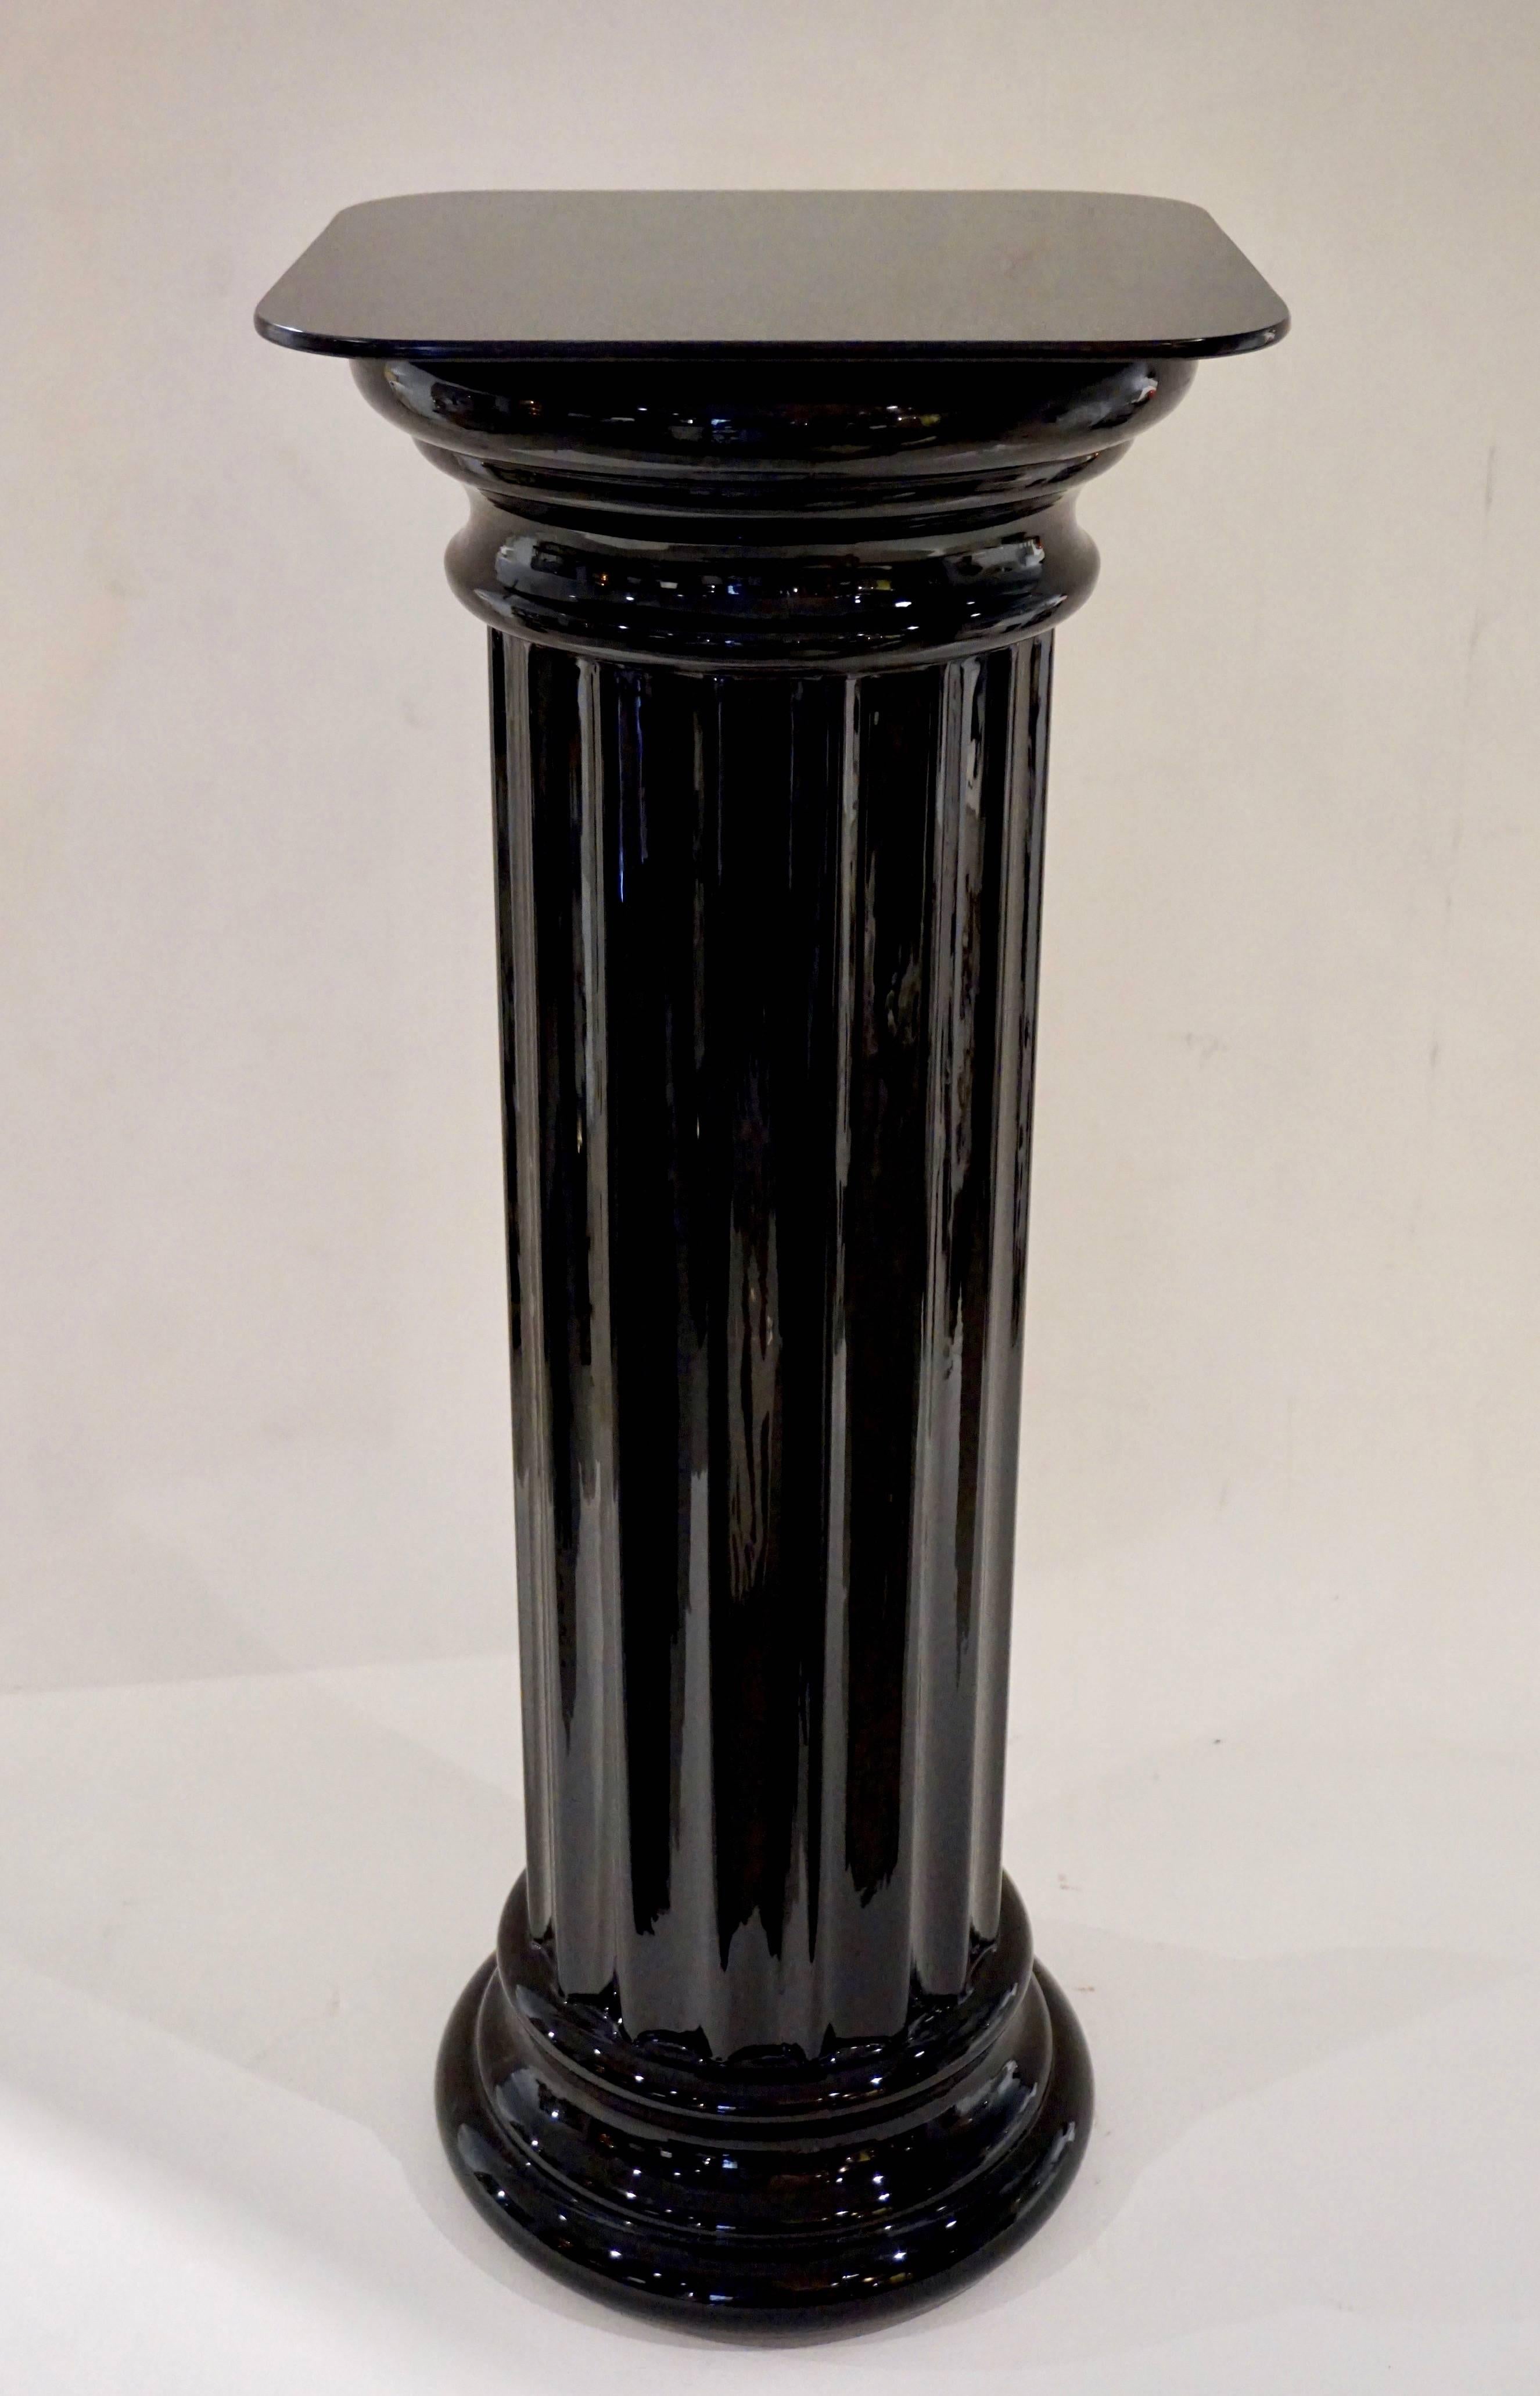 Pair of Italian pedestals with fluted bodies in high quality shiny black blown glass, with shaped moulded plinth and top, finishing with a square top surface to provide maximum exhibit space, a rare item being in glass with a perfect height for a